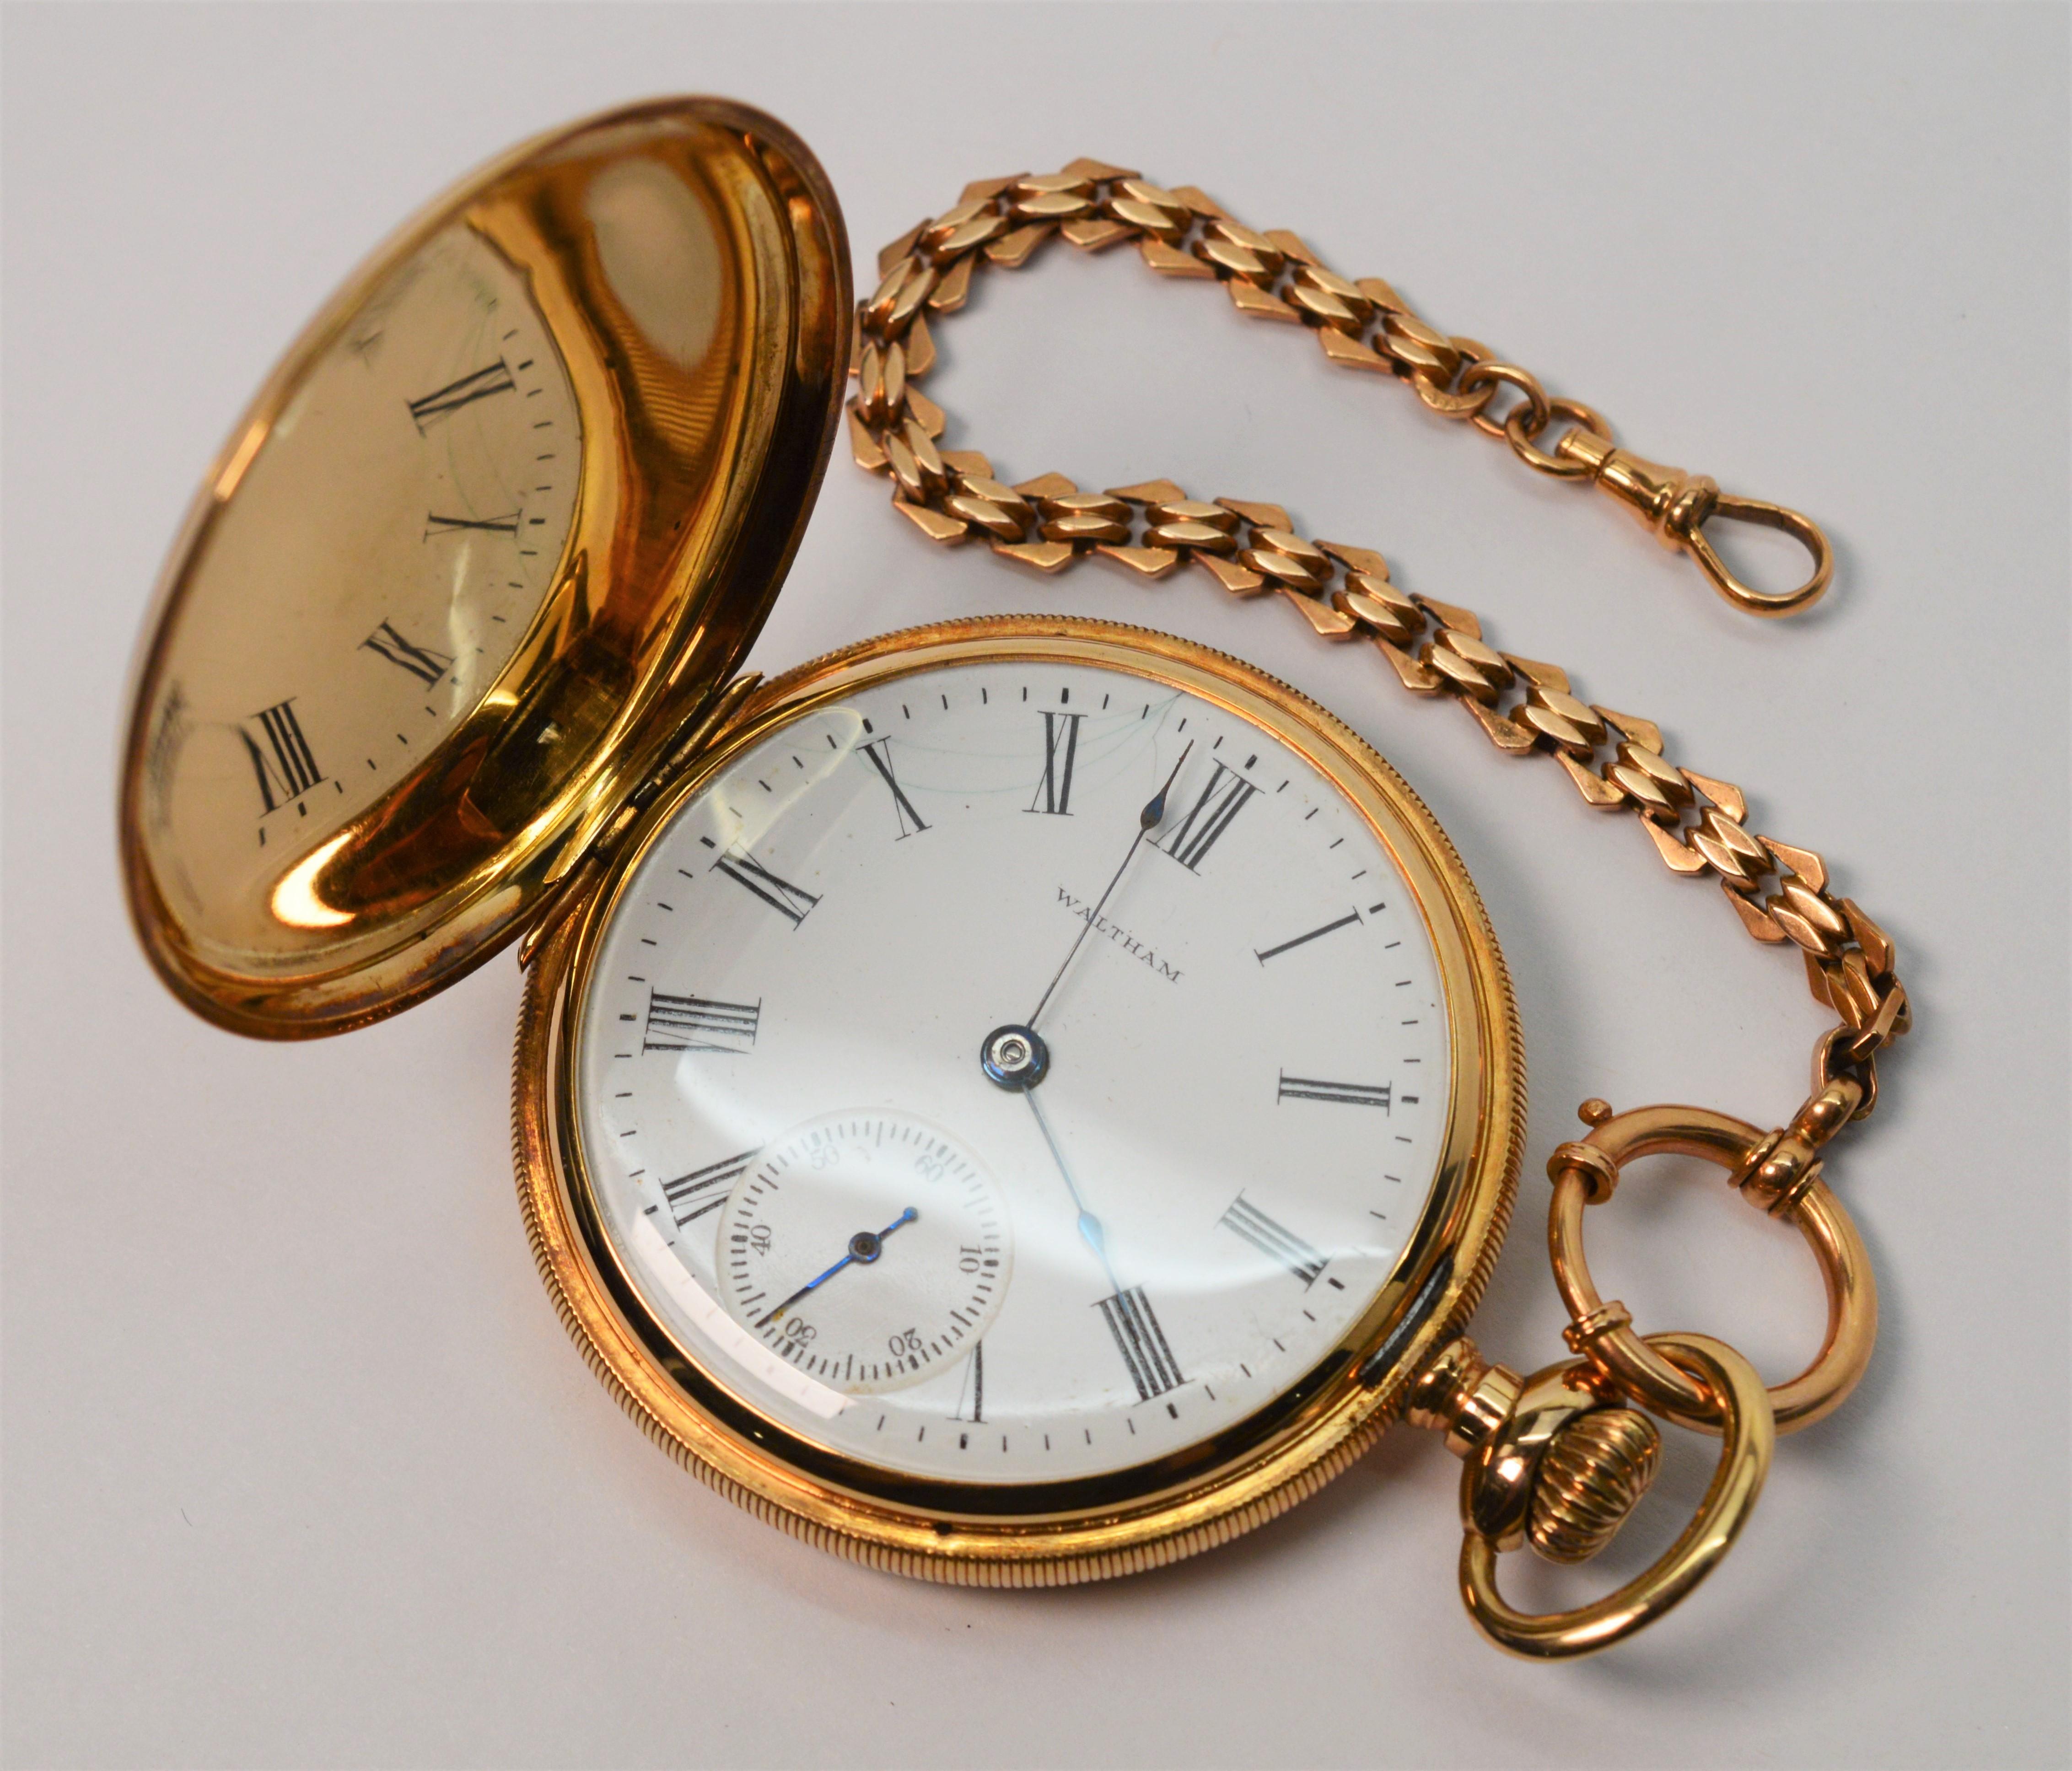 Enjoy this classic ,circa 1903, antique Waltham Pocket Watch #610, model 1899, size 16 s with 48mm hunting case #6250067 in 14 karat yellow gold. 
This early 20th century American made pocket watch is made with a fancy acid etched movement #12811871